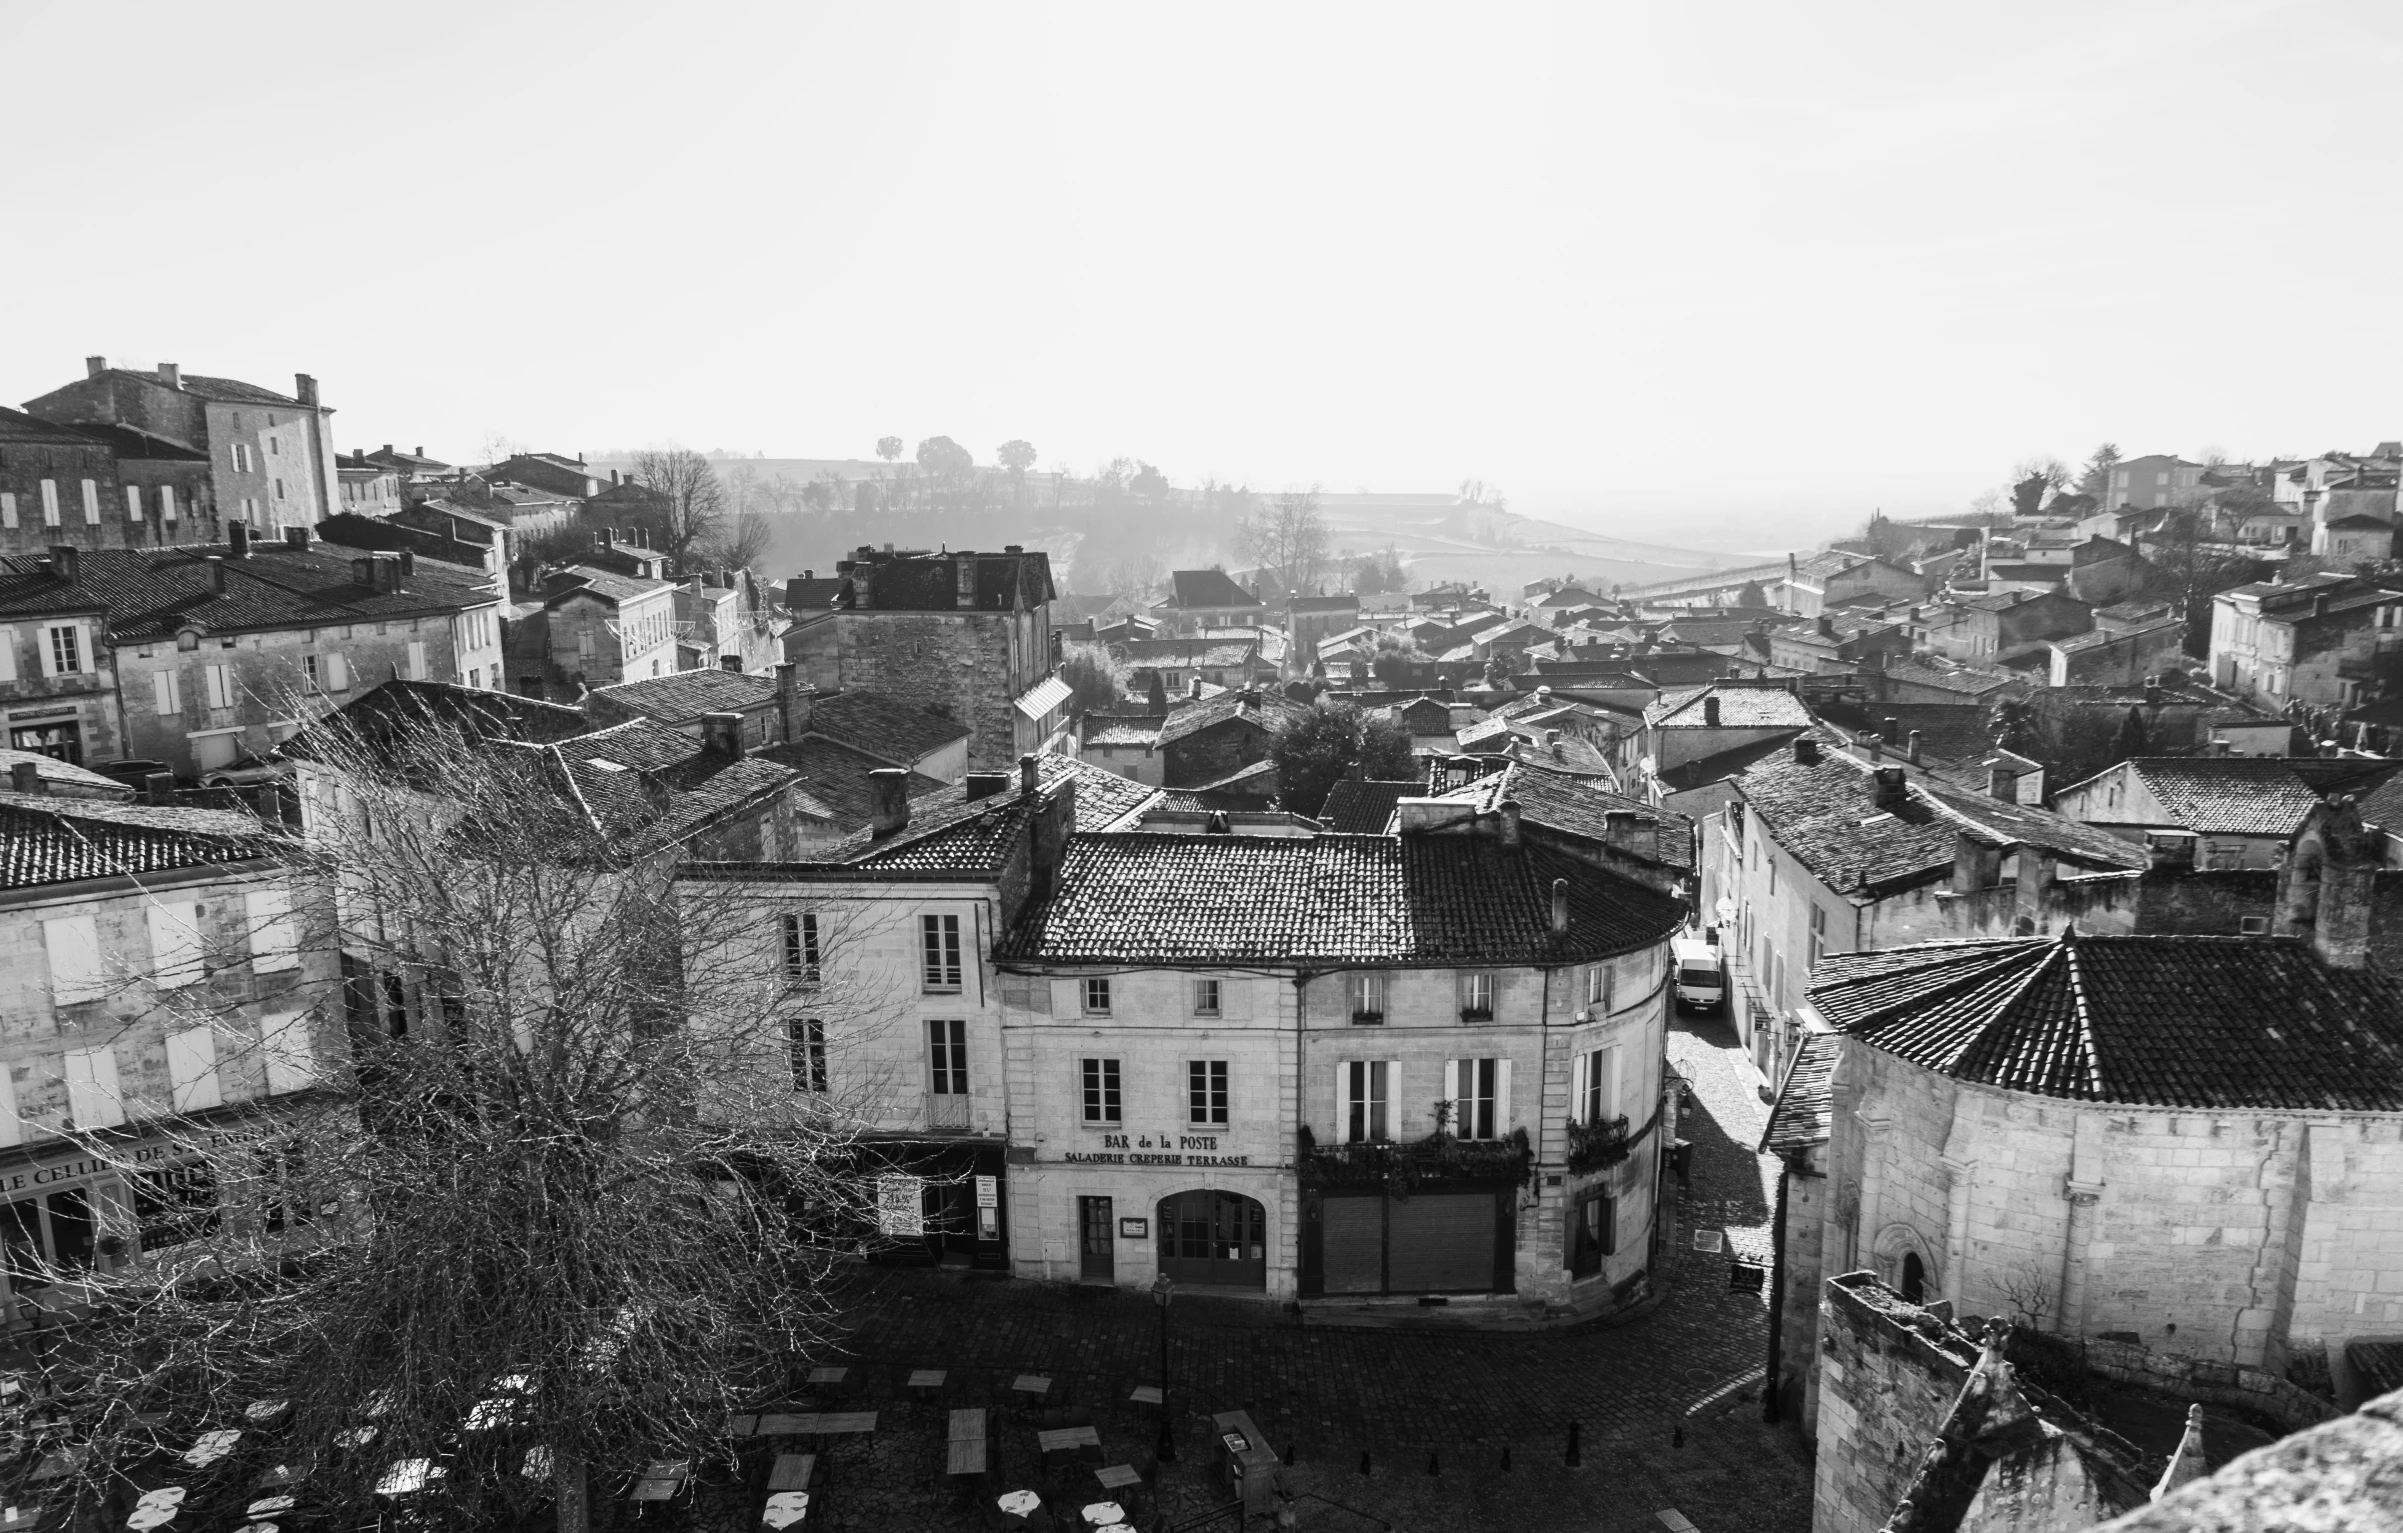 cityscape with old buildings on hillside in black and white